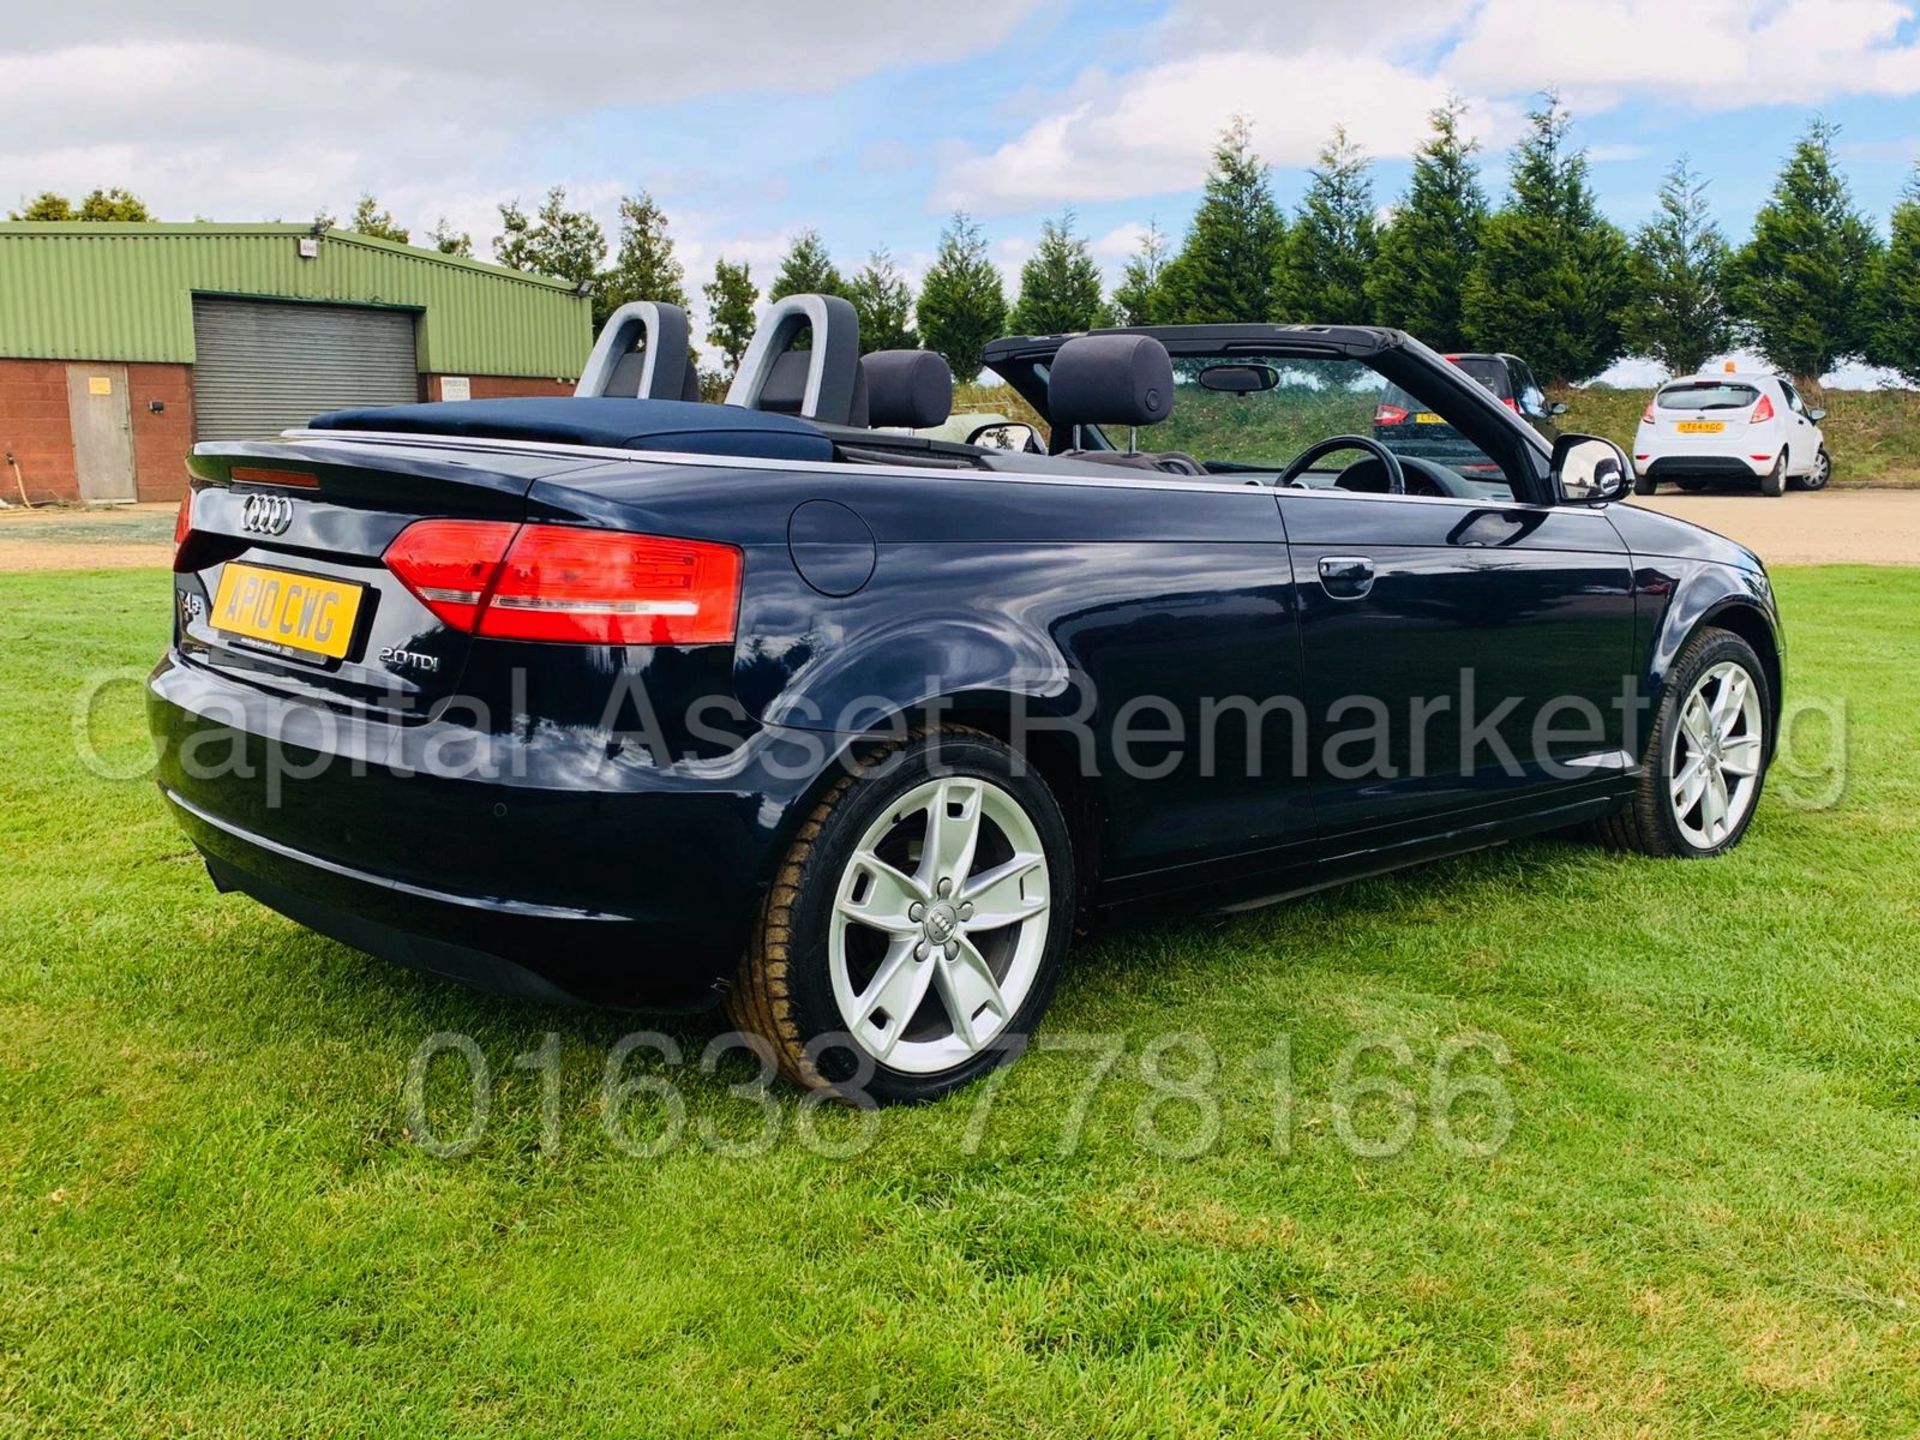 (On Sale) AUDI A3 *CONVERTIBLE / CABRIOLET* SPORT EDITION (2010) '2.0 TDI - 140 BHP - 6 SPEED' - Image 20 of 47